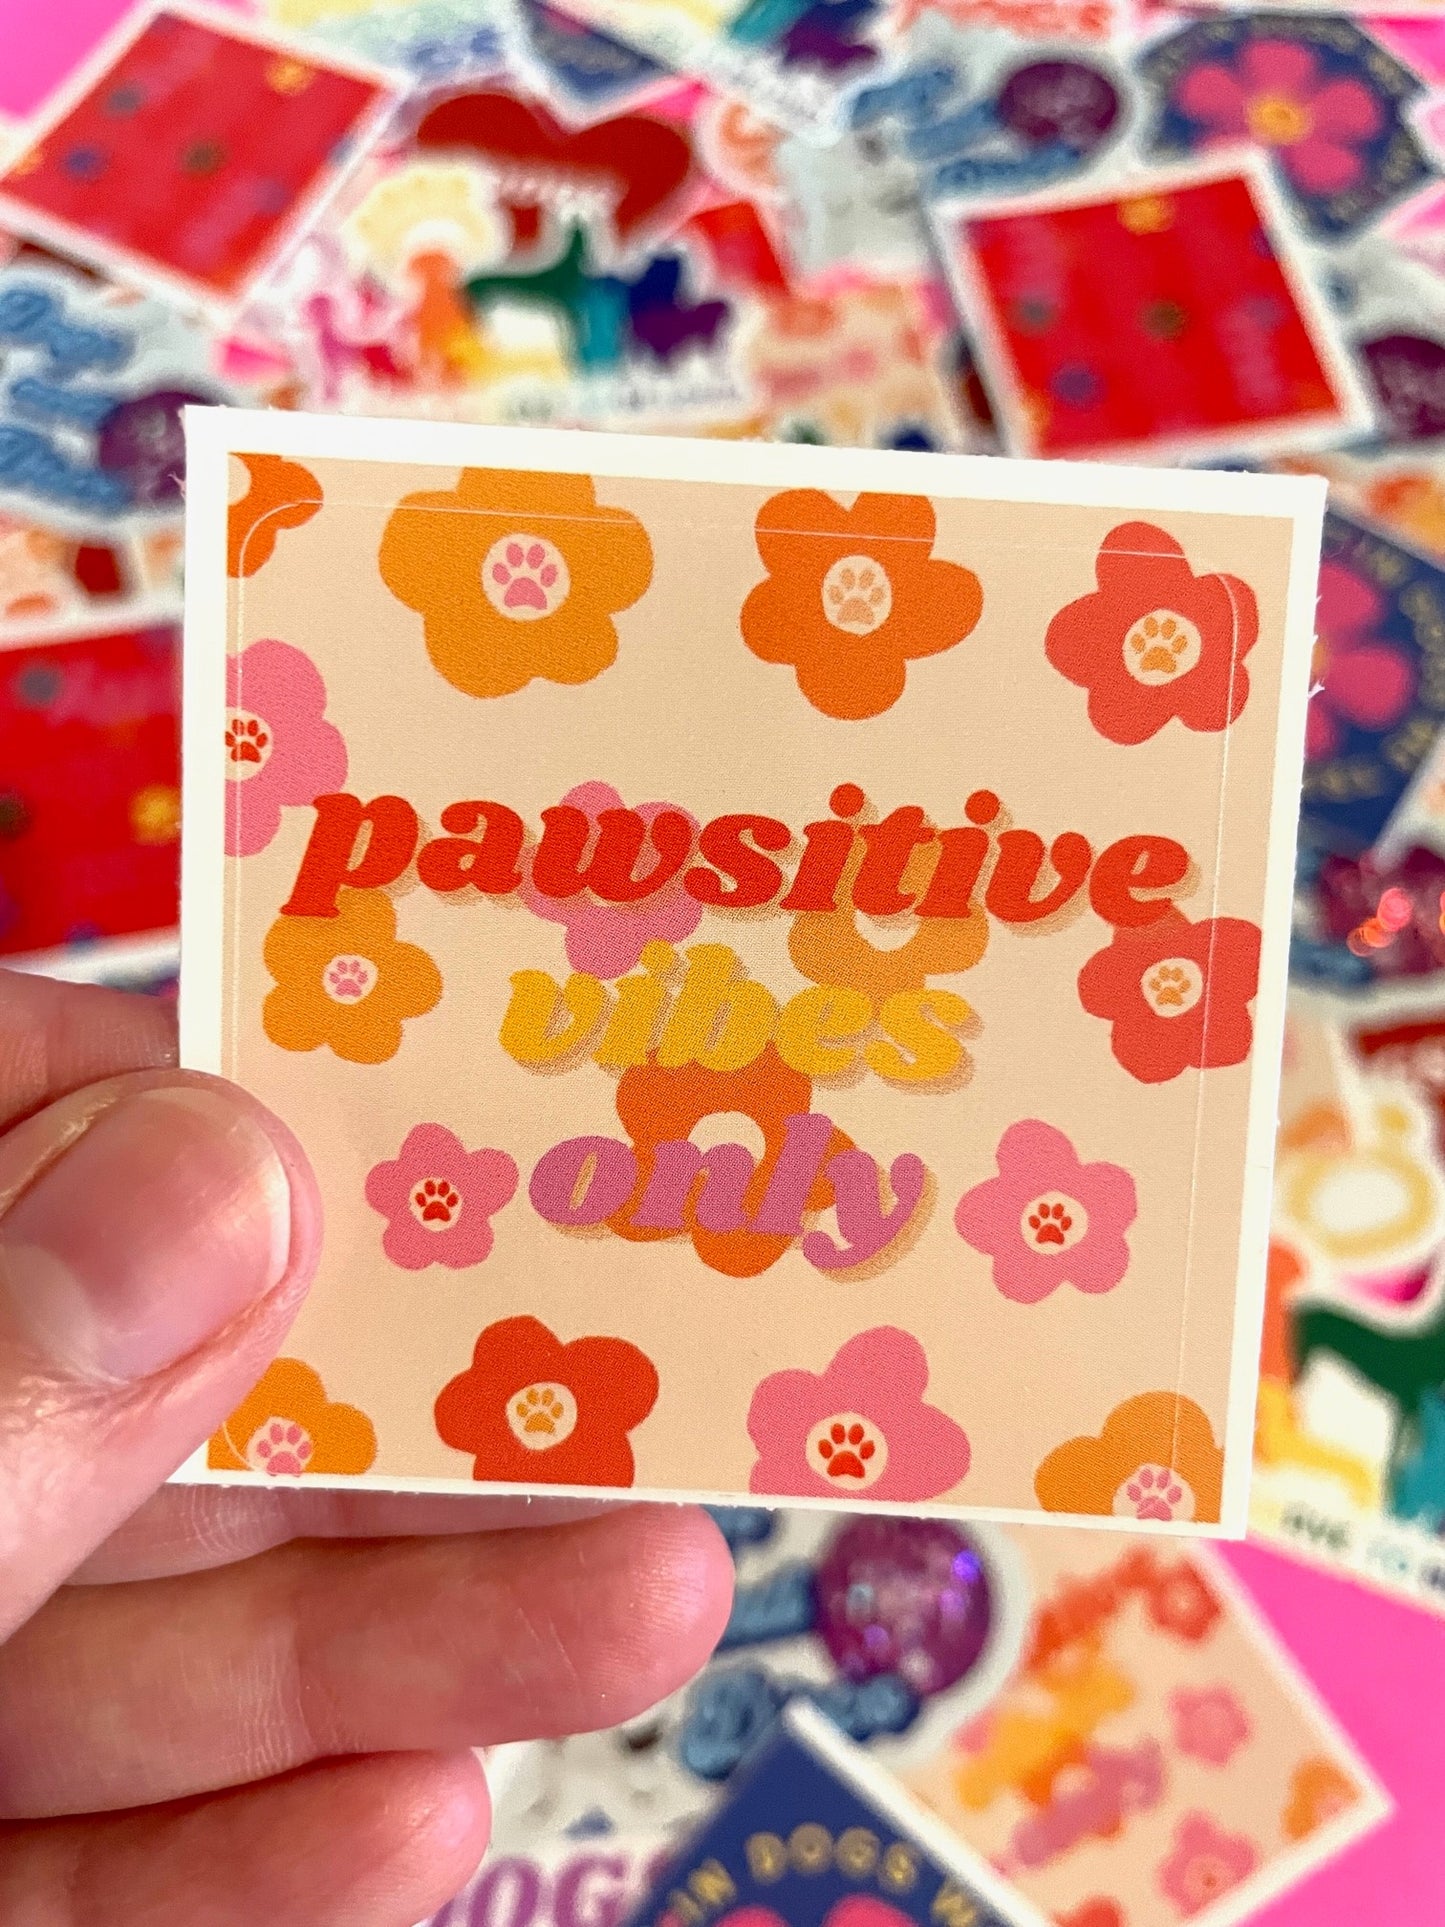 PAWSITIVE VIBES ONLY STICKER